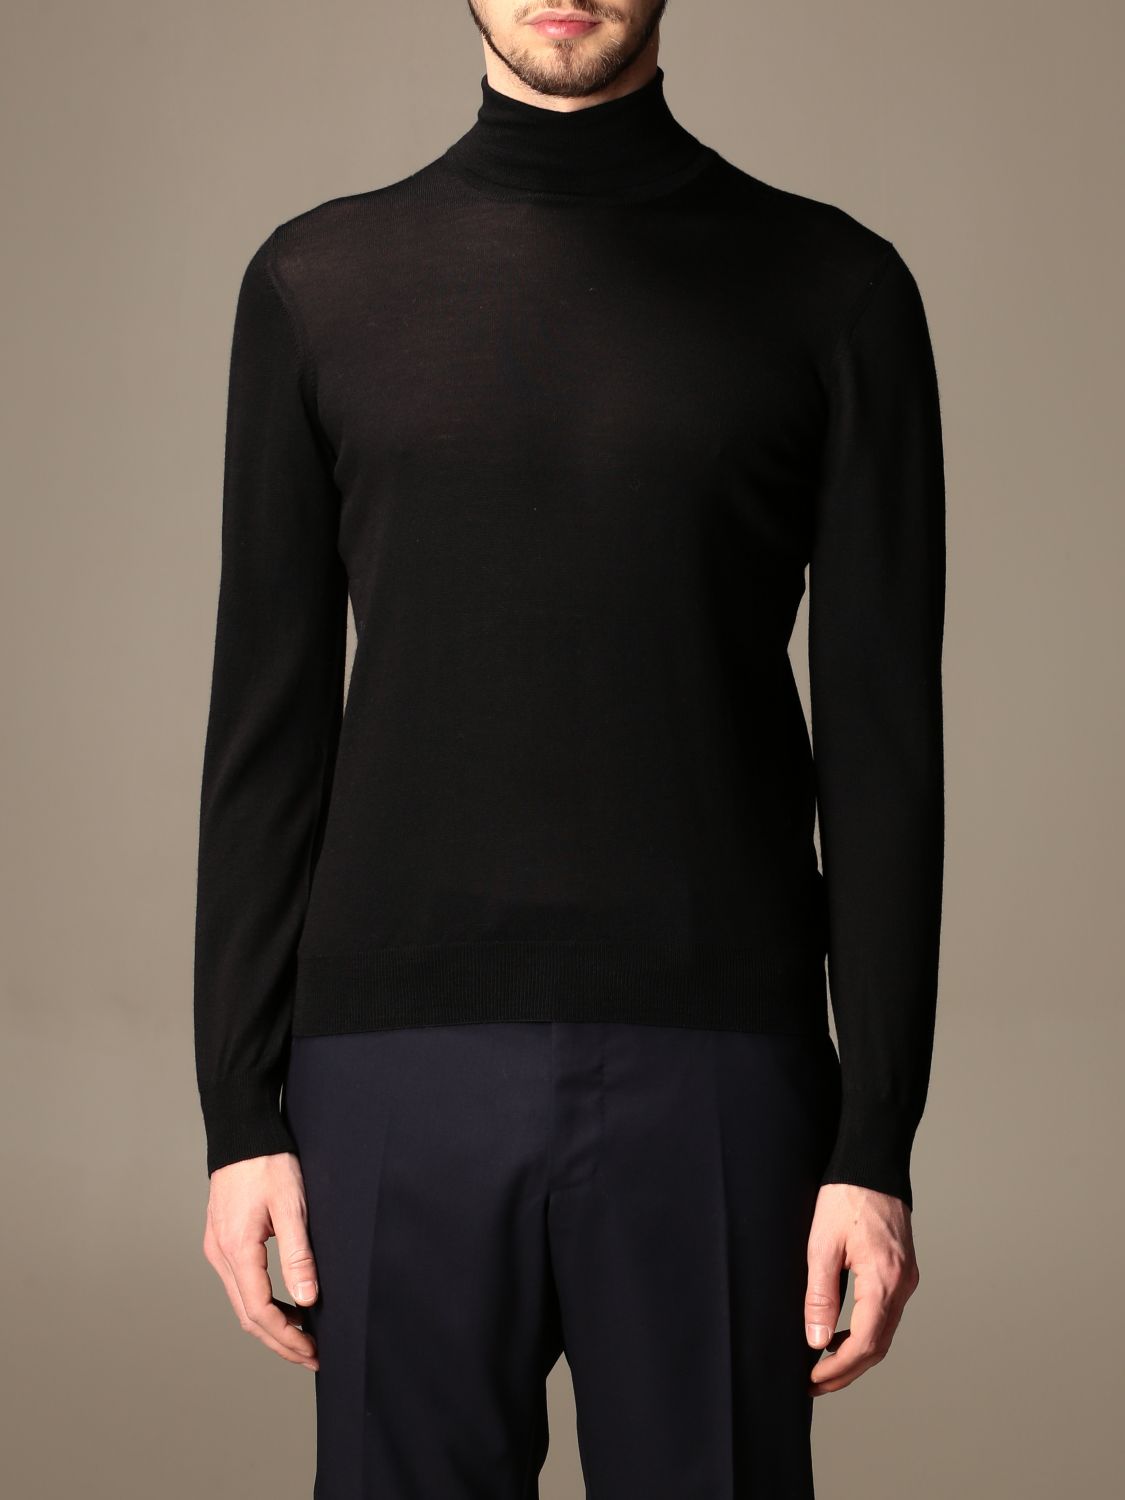 Tagliatore Outlet: turtleneck in wool and silk - Black | Sweater ...